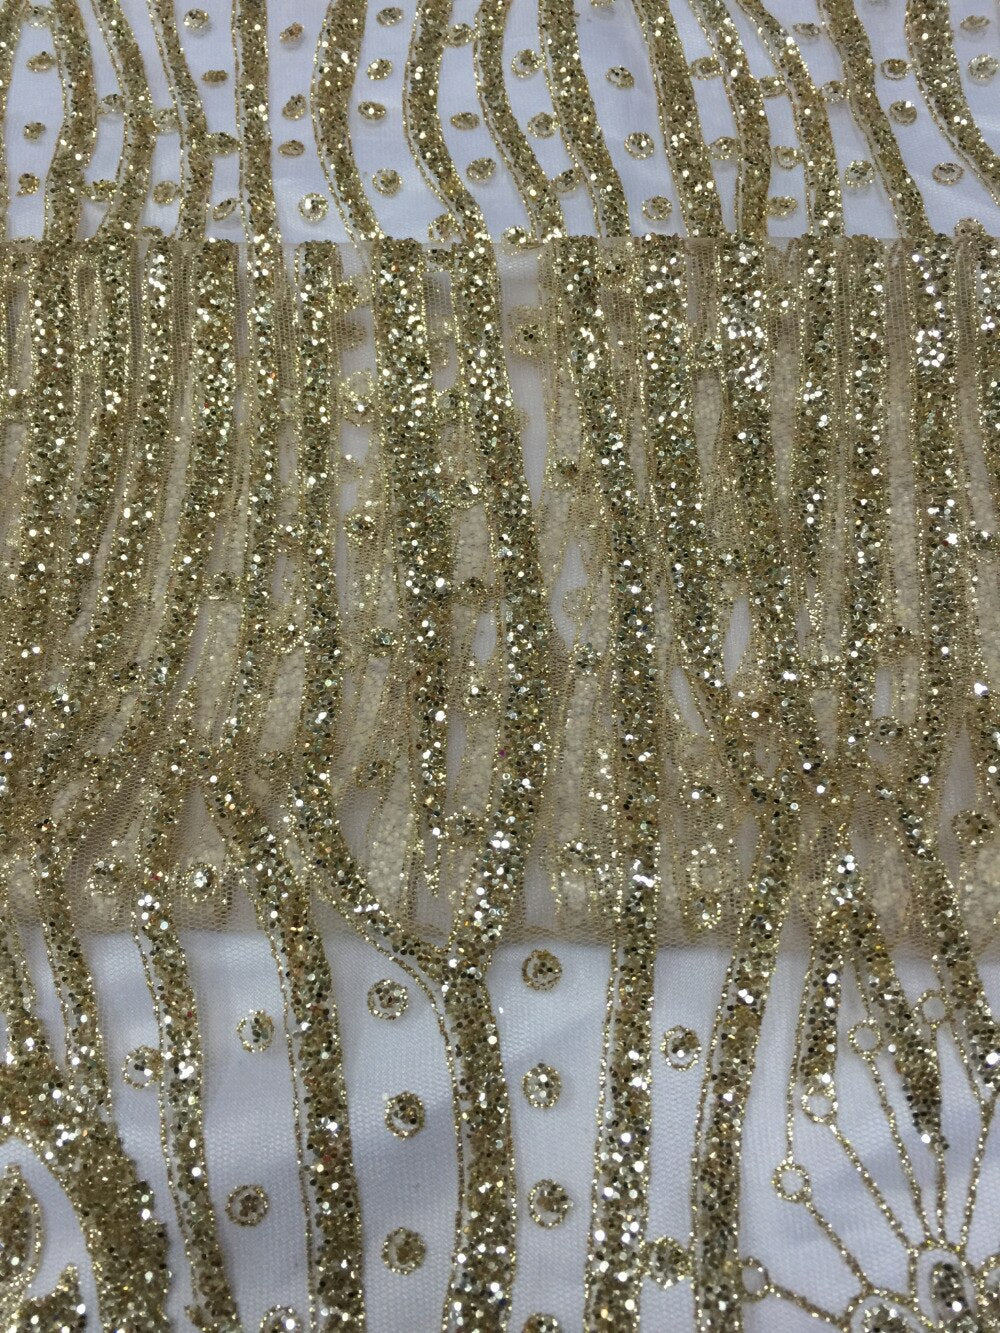 5 YARDS / Fleurine Floral Beaded Embroidery Sparkly Glitter Mesh Lace  Party Prom Bridal Dress Fabric